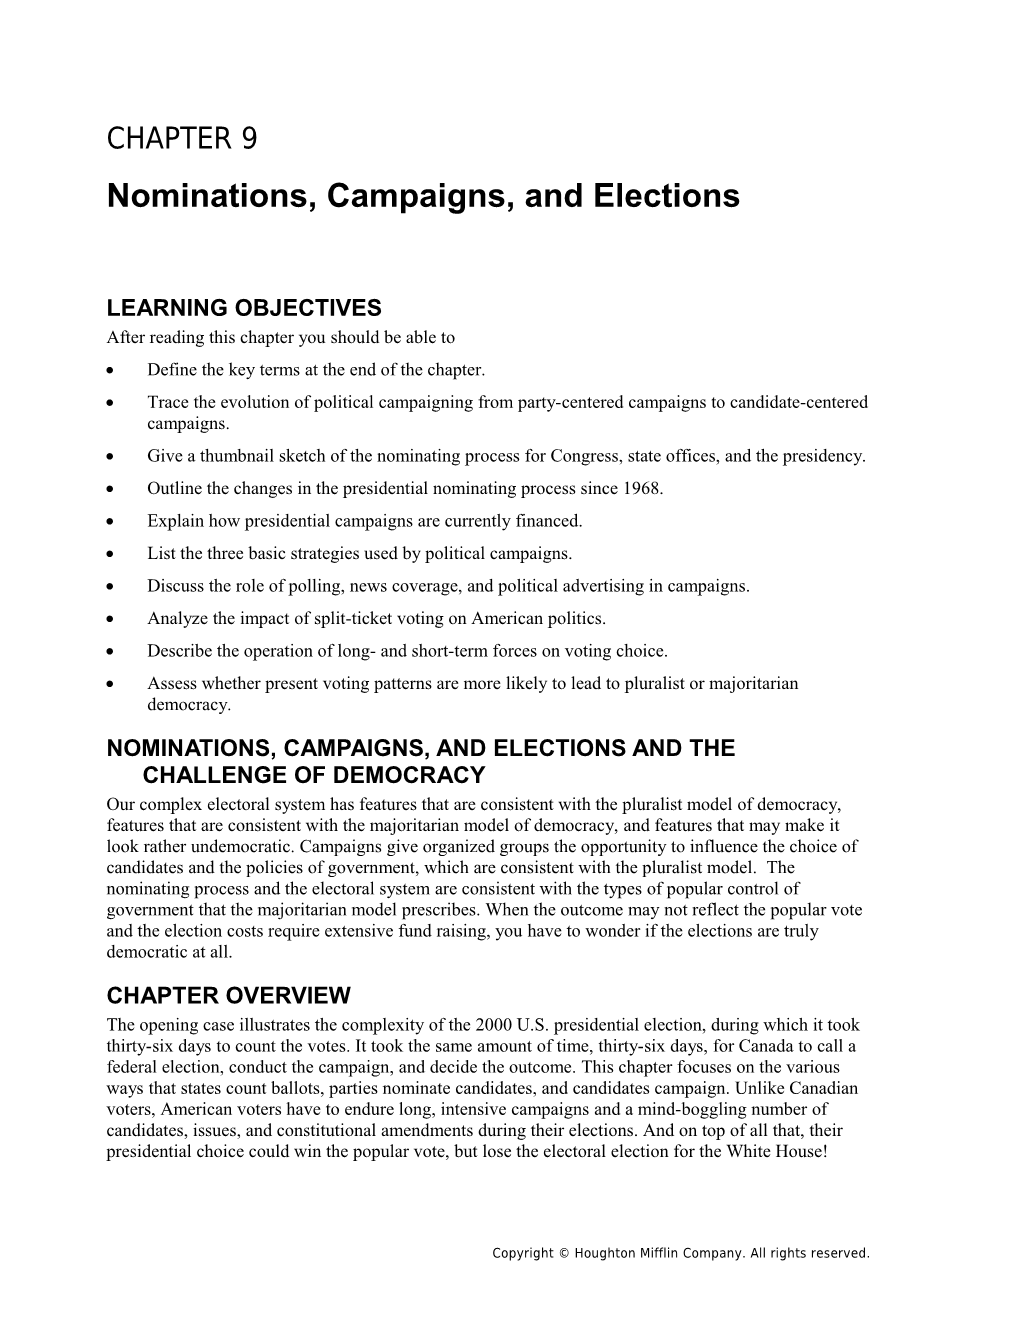 Chapter 9: Nominations, Campaigns, and Elections 89